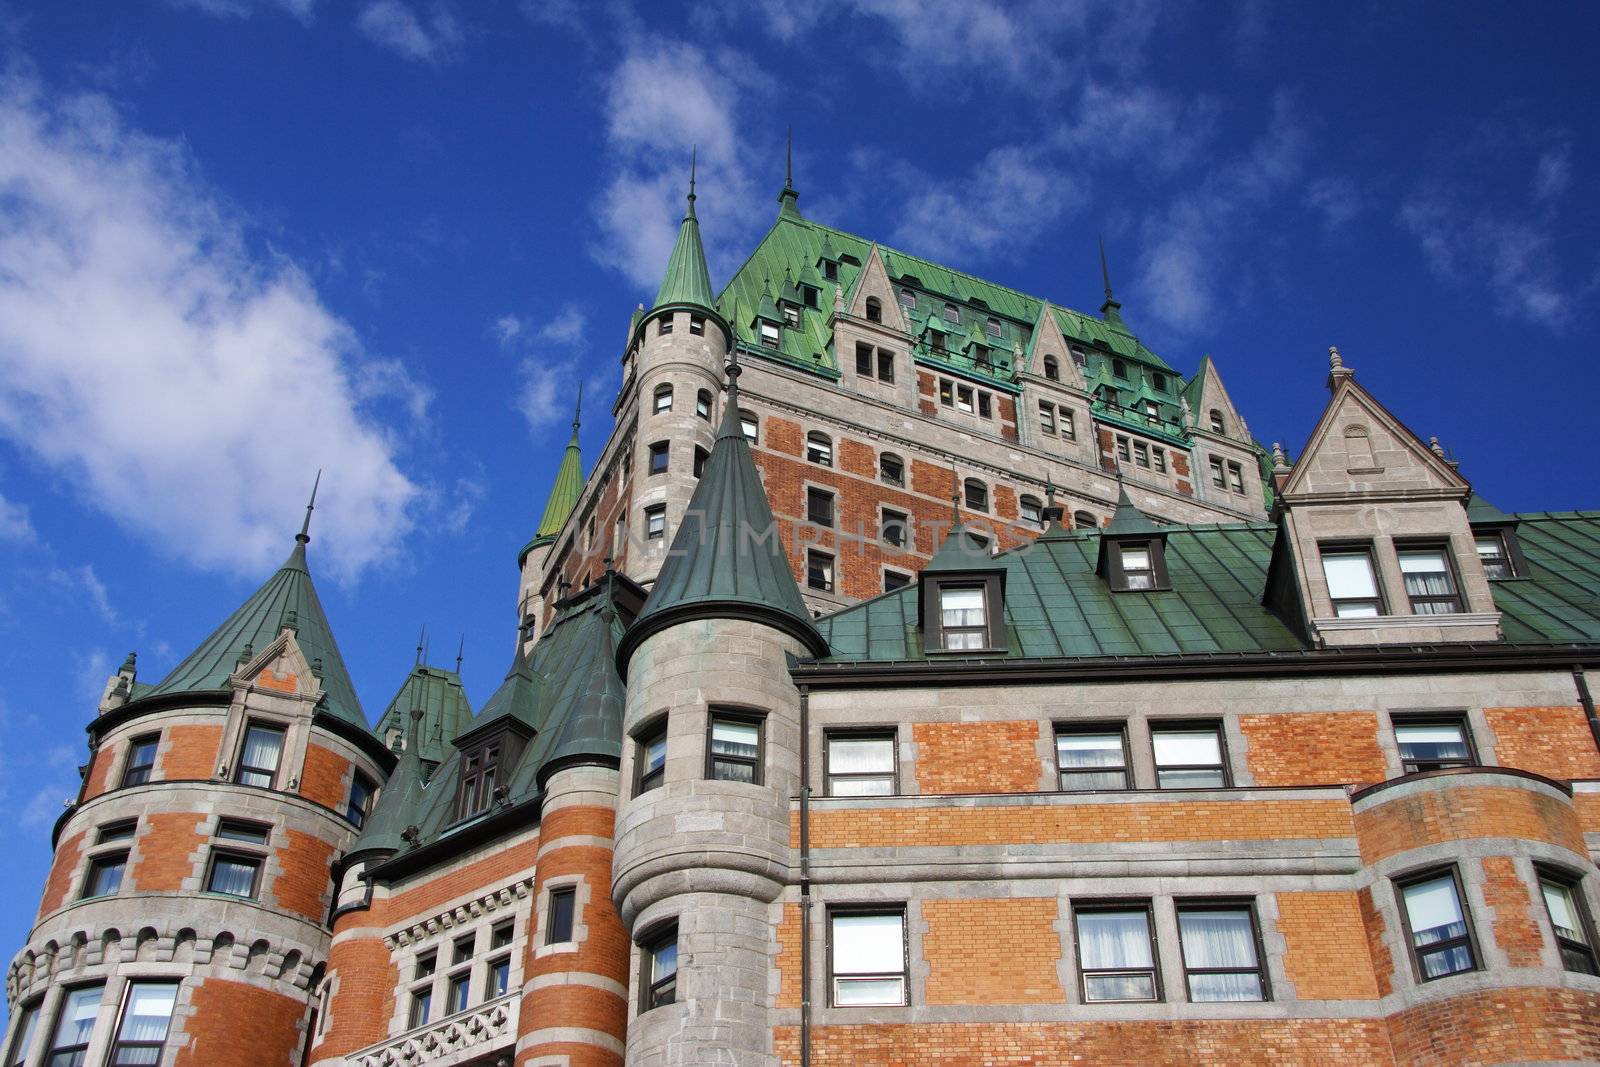 The most famous attraction in Quebec City: Chateau Frontenac